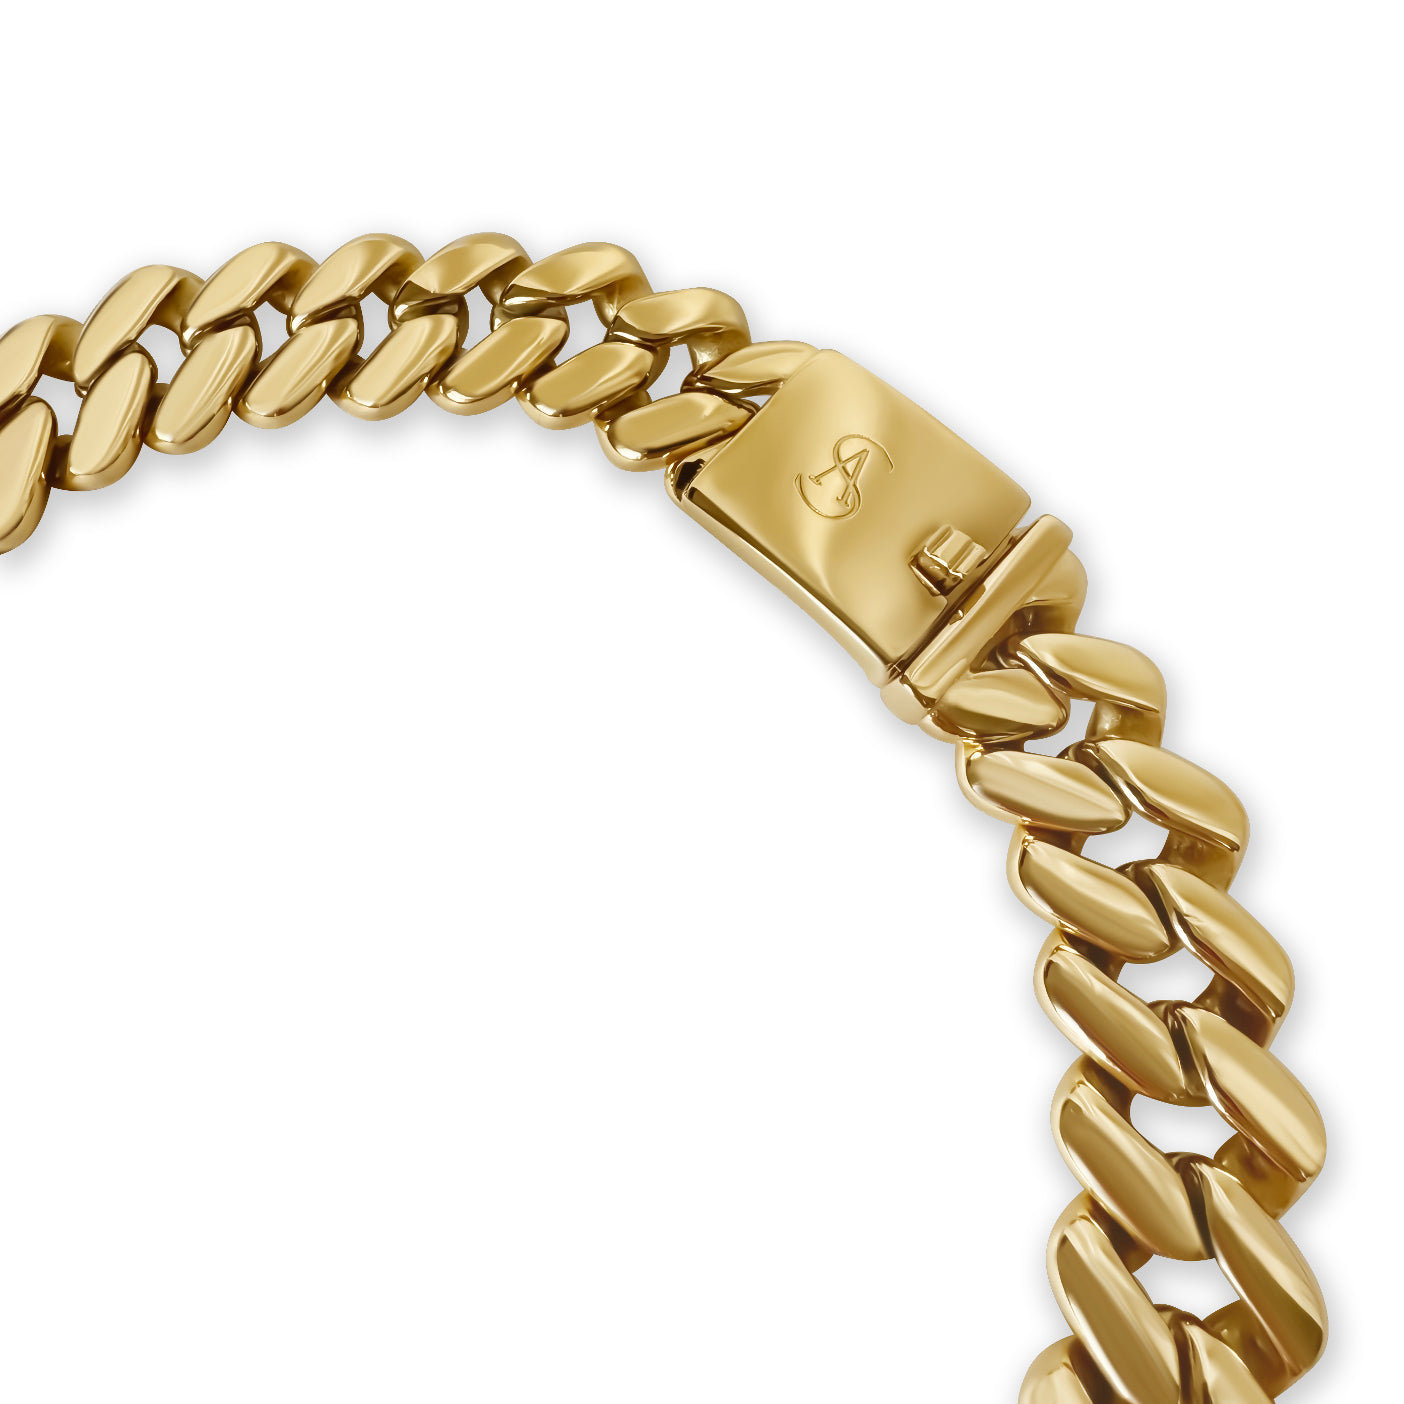 Anisa Sojka Gold Chunky Chain Link Necklace